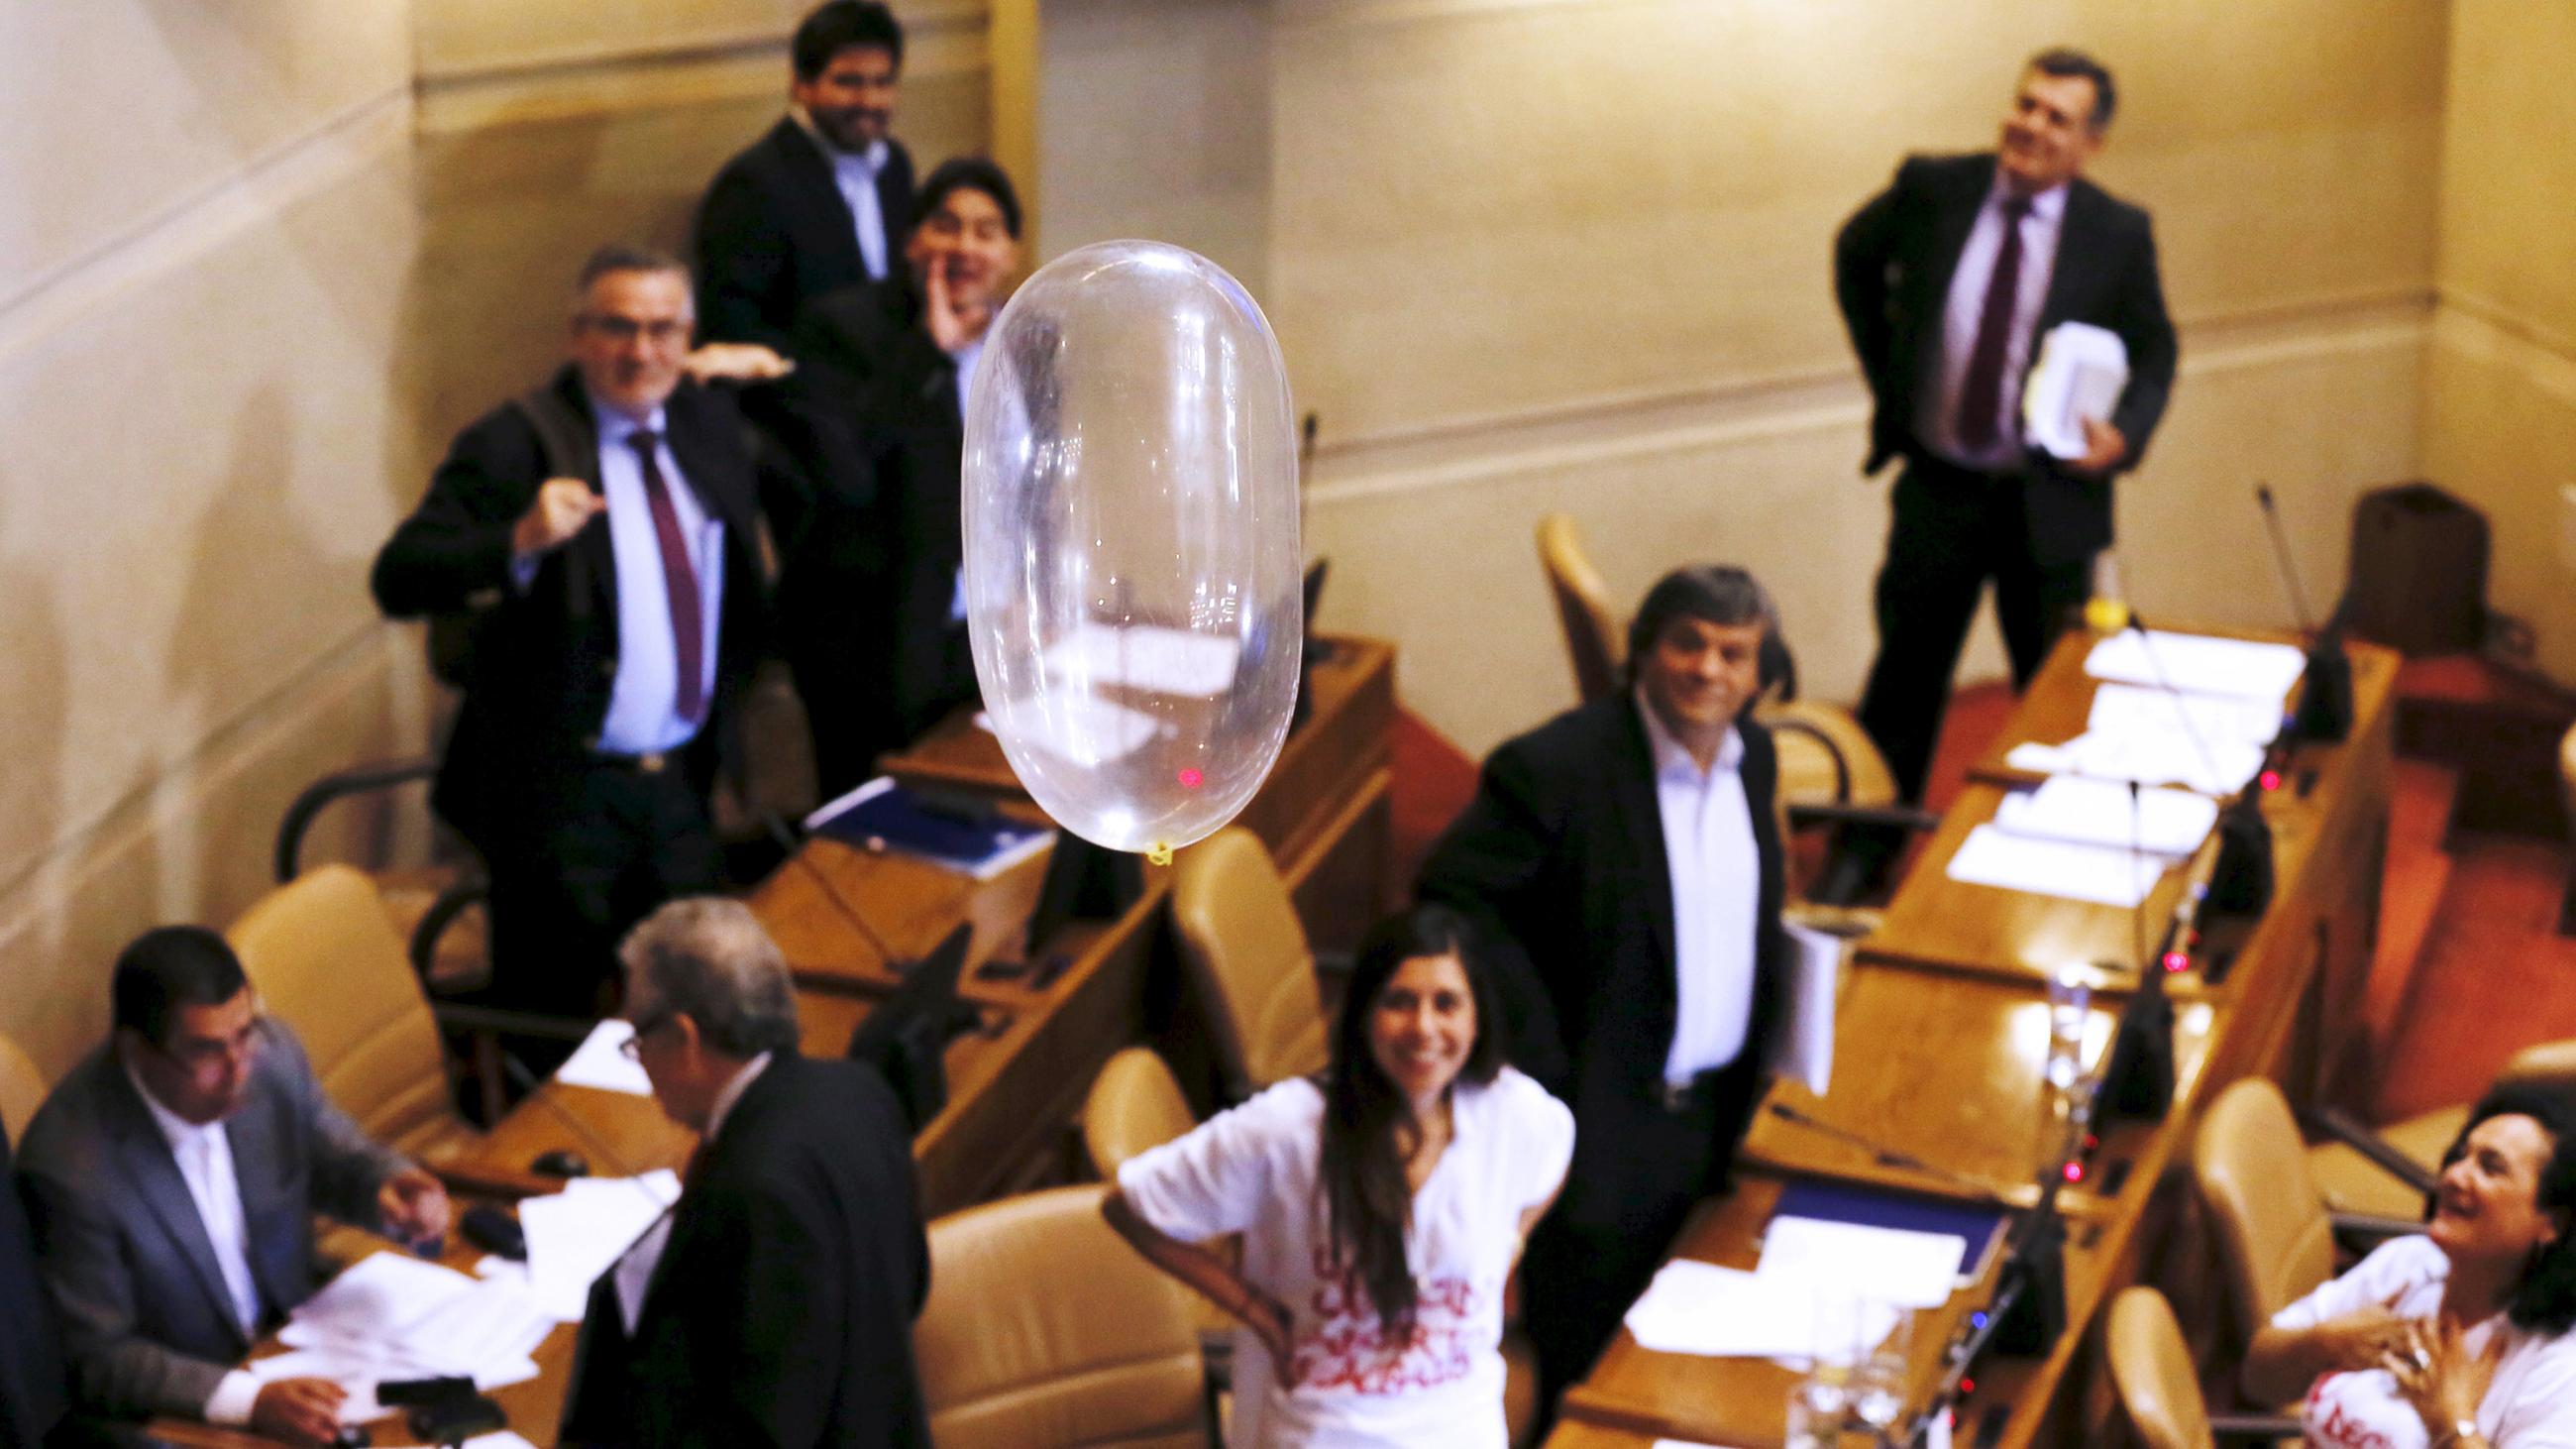 The photo shows several members of congress in their seating standing and looking amused as a blown-up condom can be seen in the foreground. 